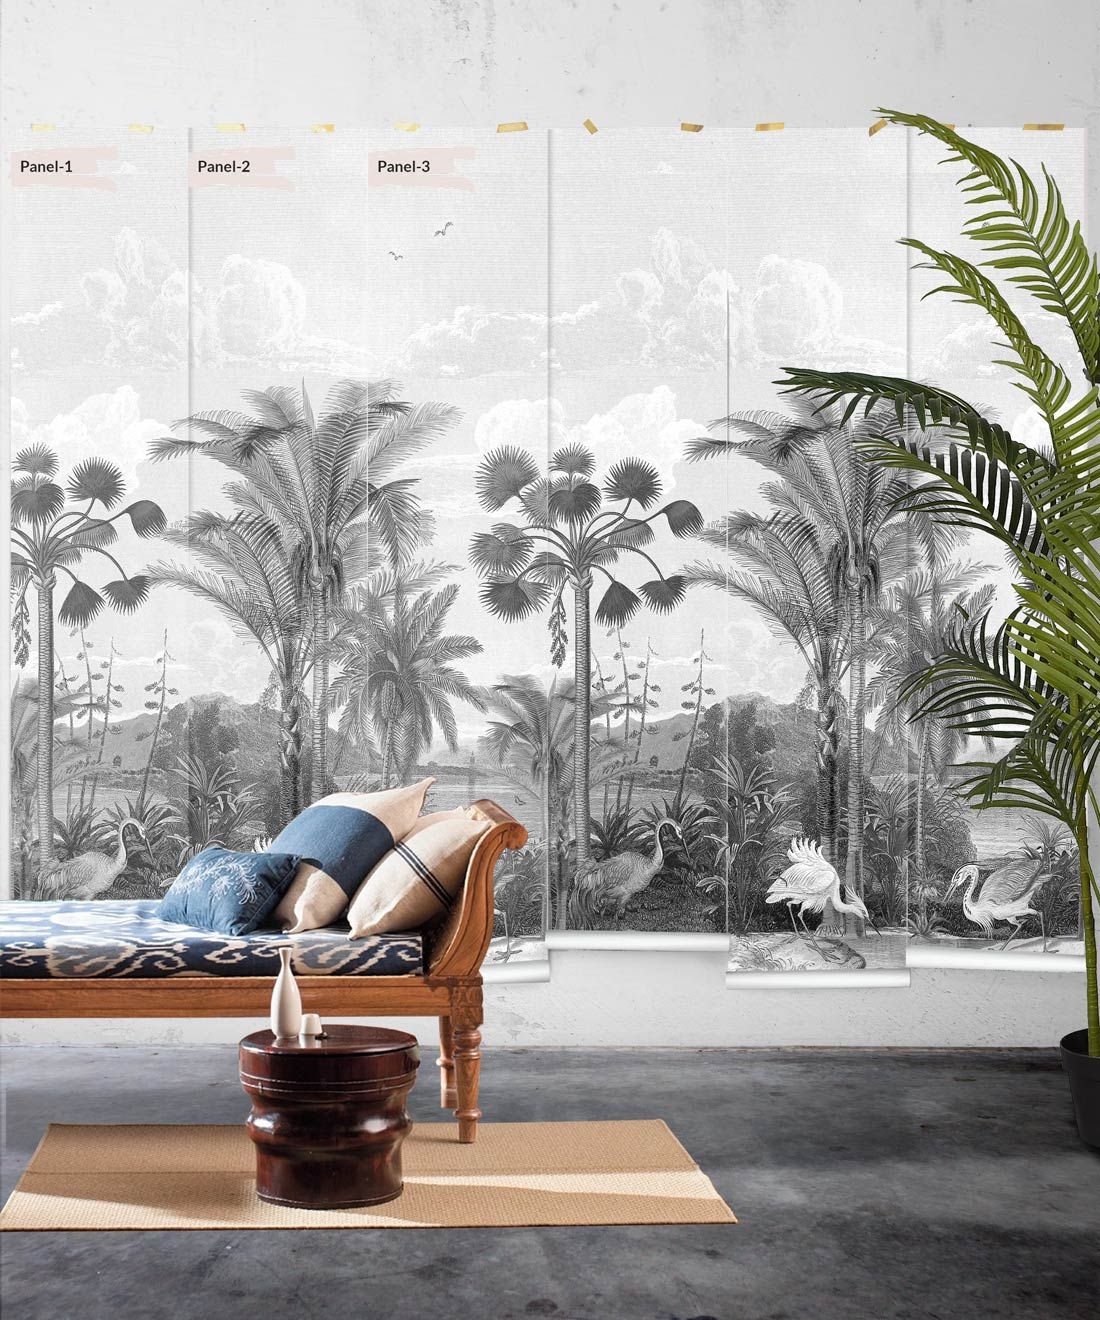 South Asian Subcontinent Wallpaper Mural •Bethany Linz • Palm Tree Mural • Black & White • Panels